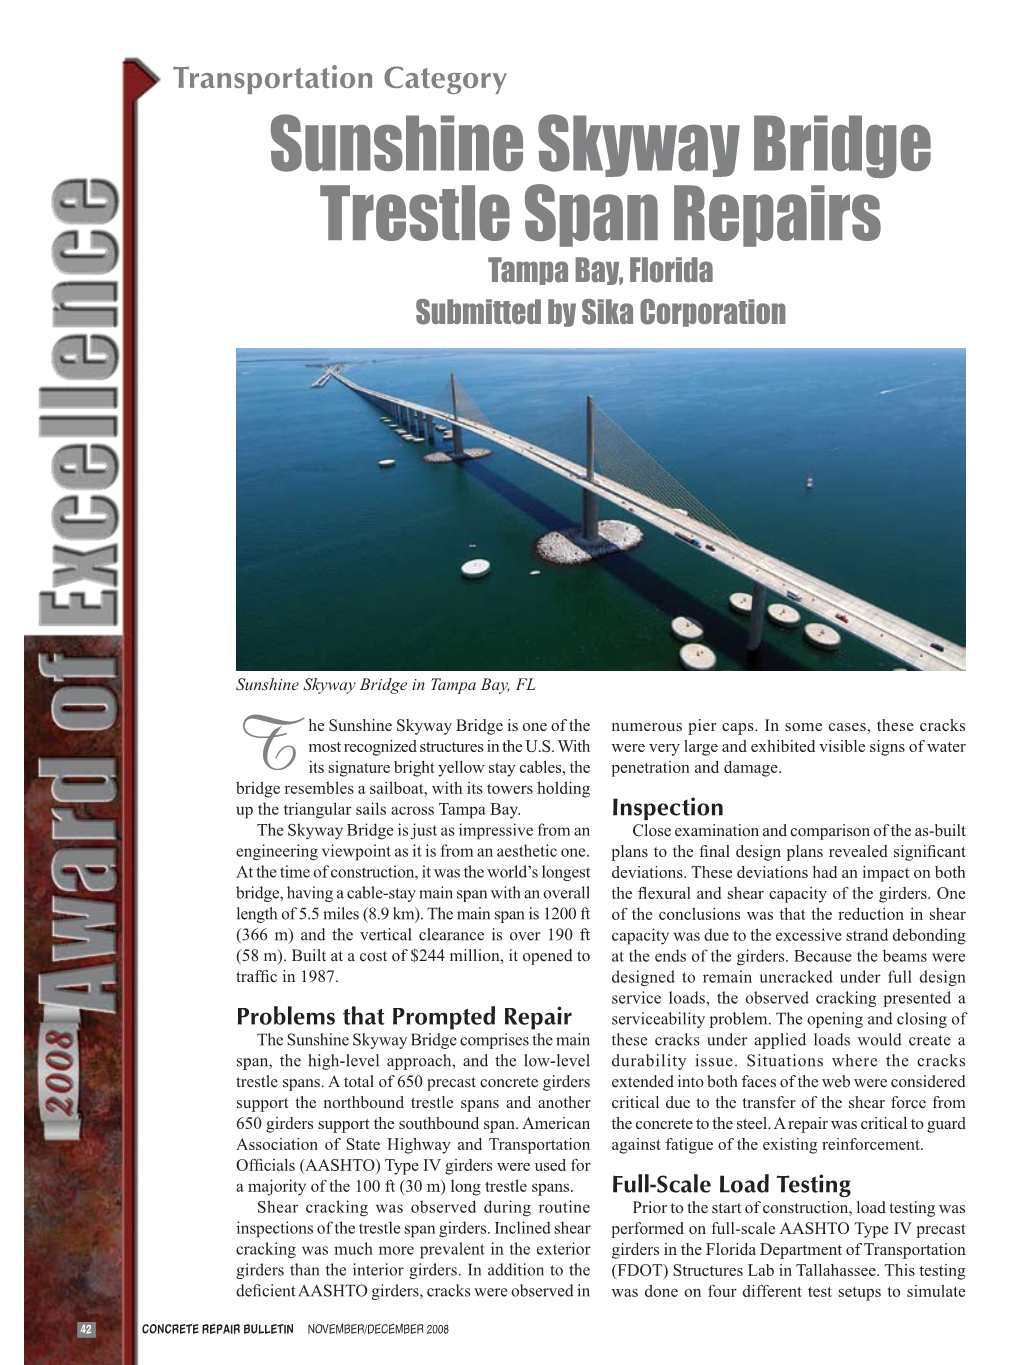 Sunshine Skyway Bridge Trestle Span Repairs Tampa Bay, Florida Submitted by Sika Corporation